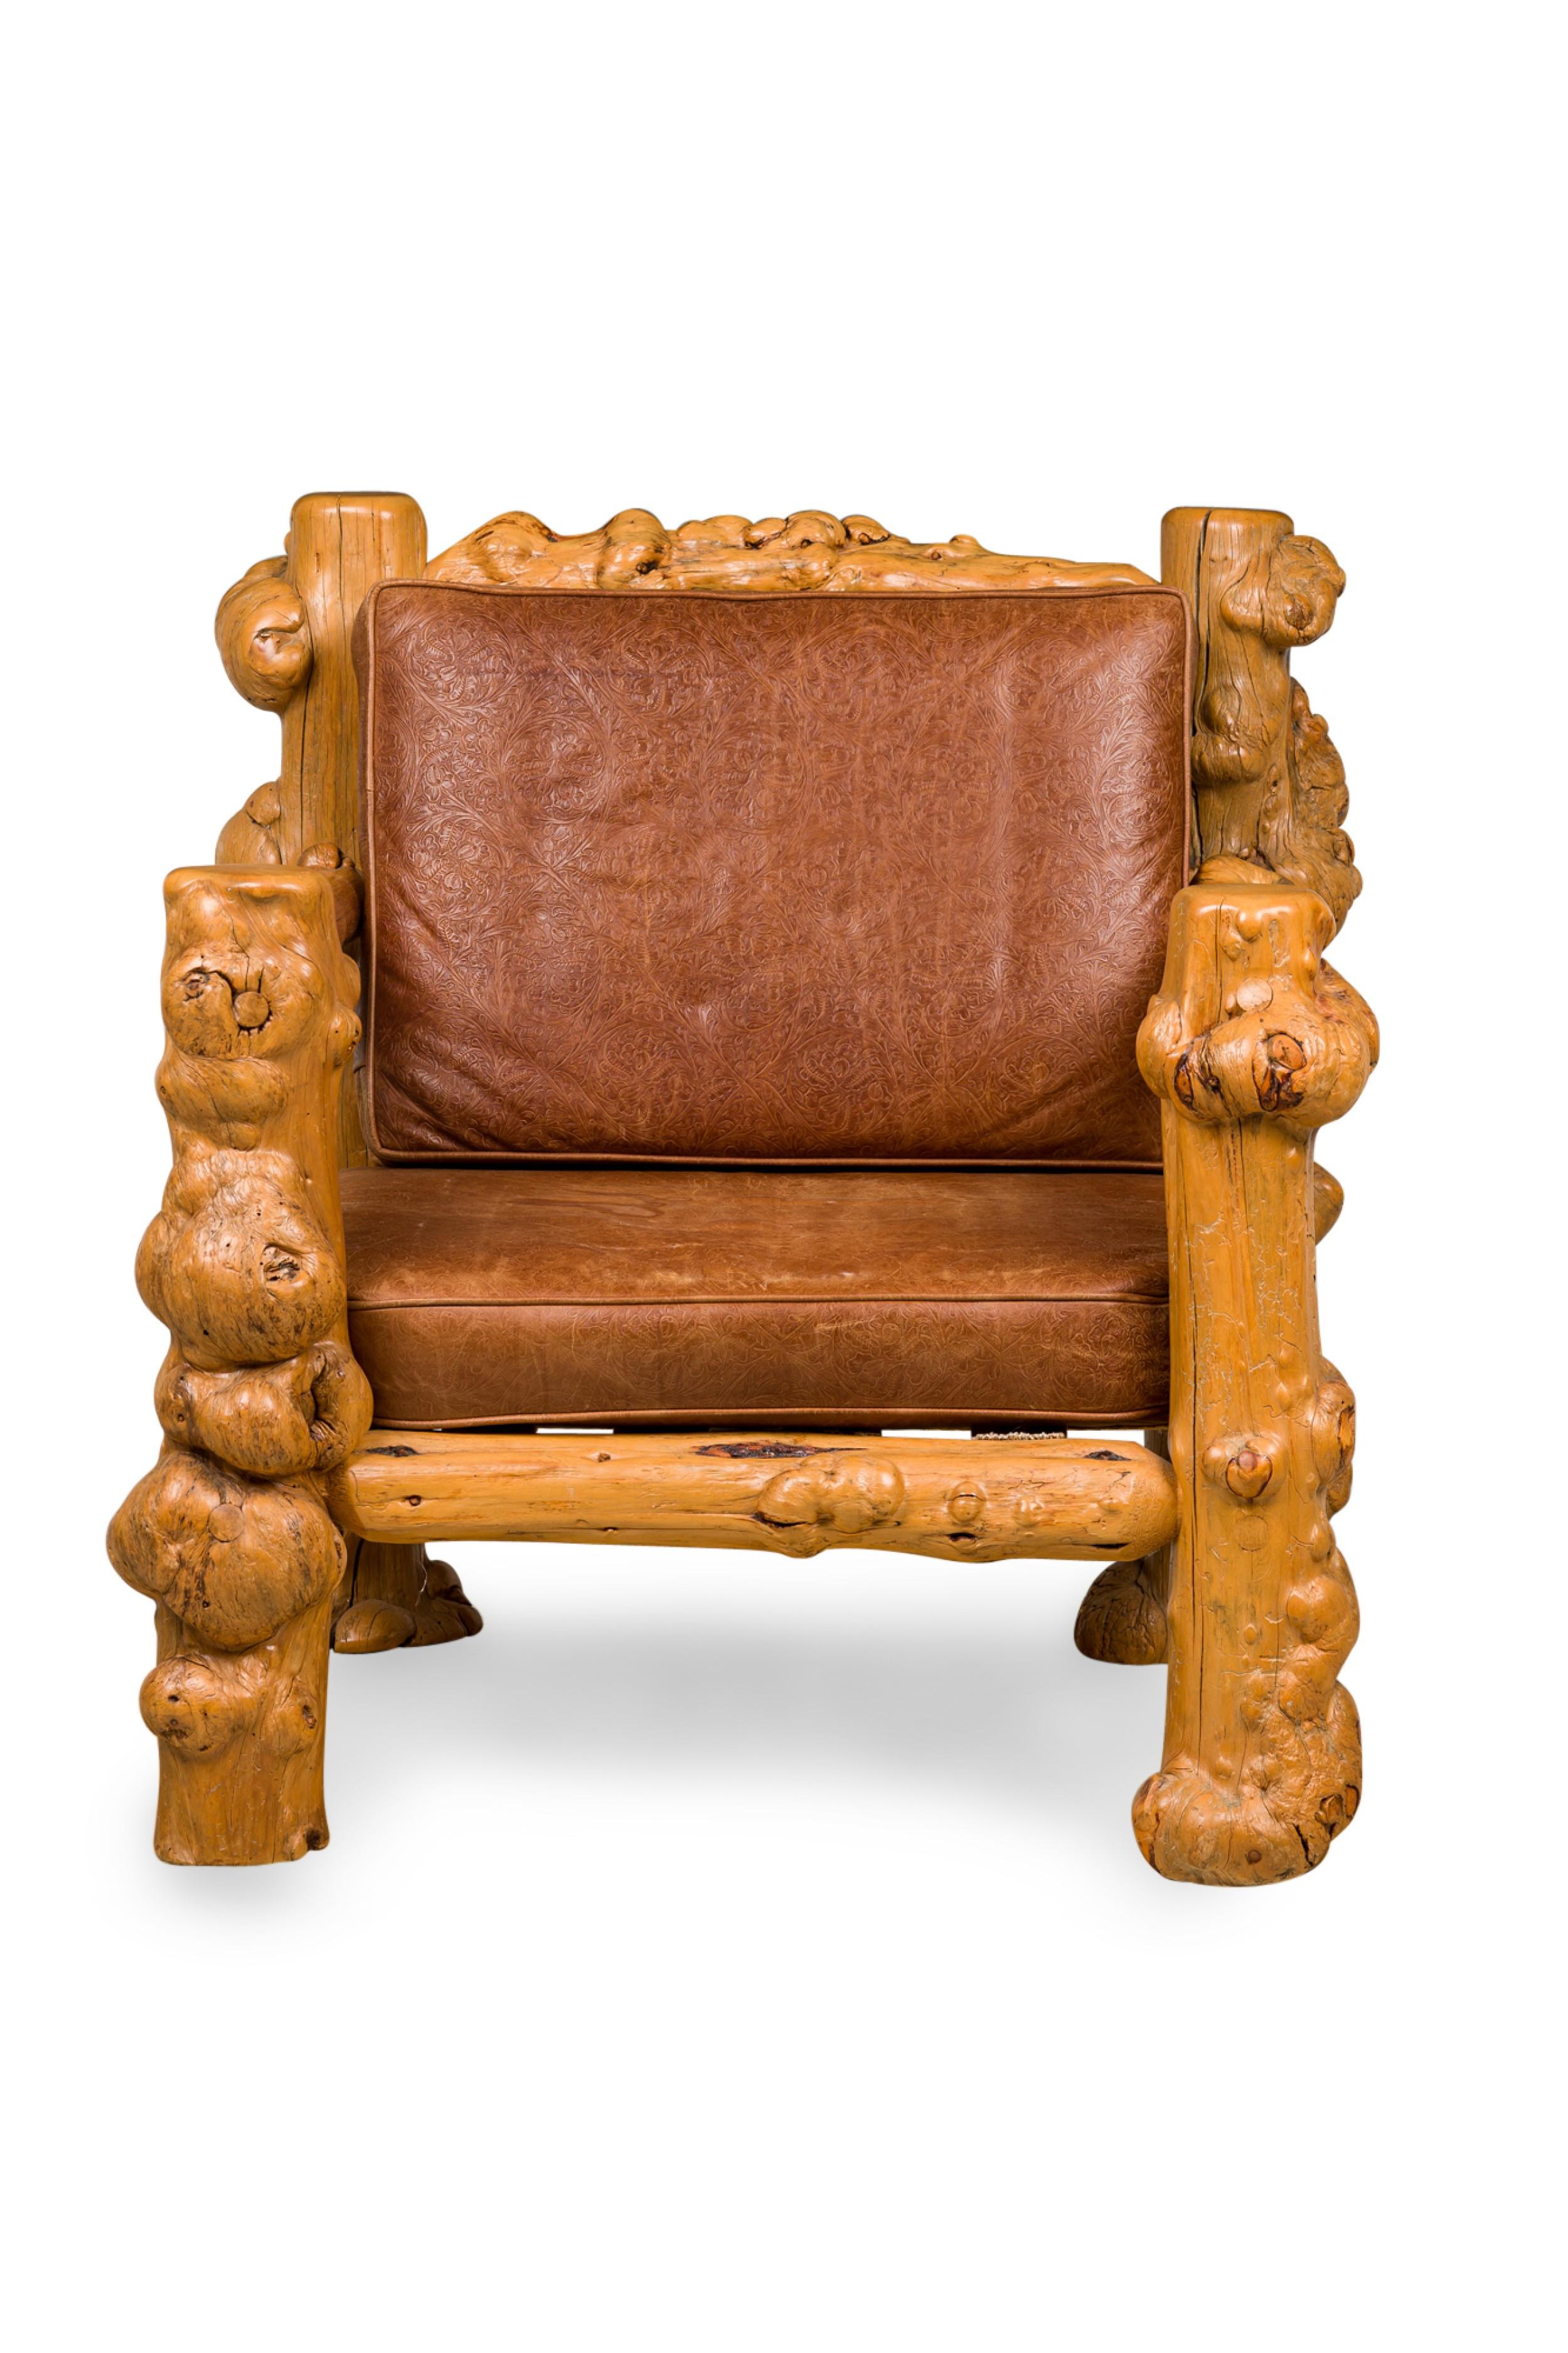 Rustic Blond Root Wood and Embossed Leather Throne Armchair For Sale 1